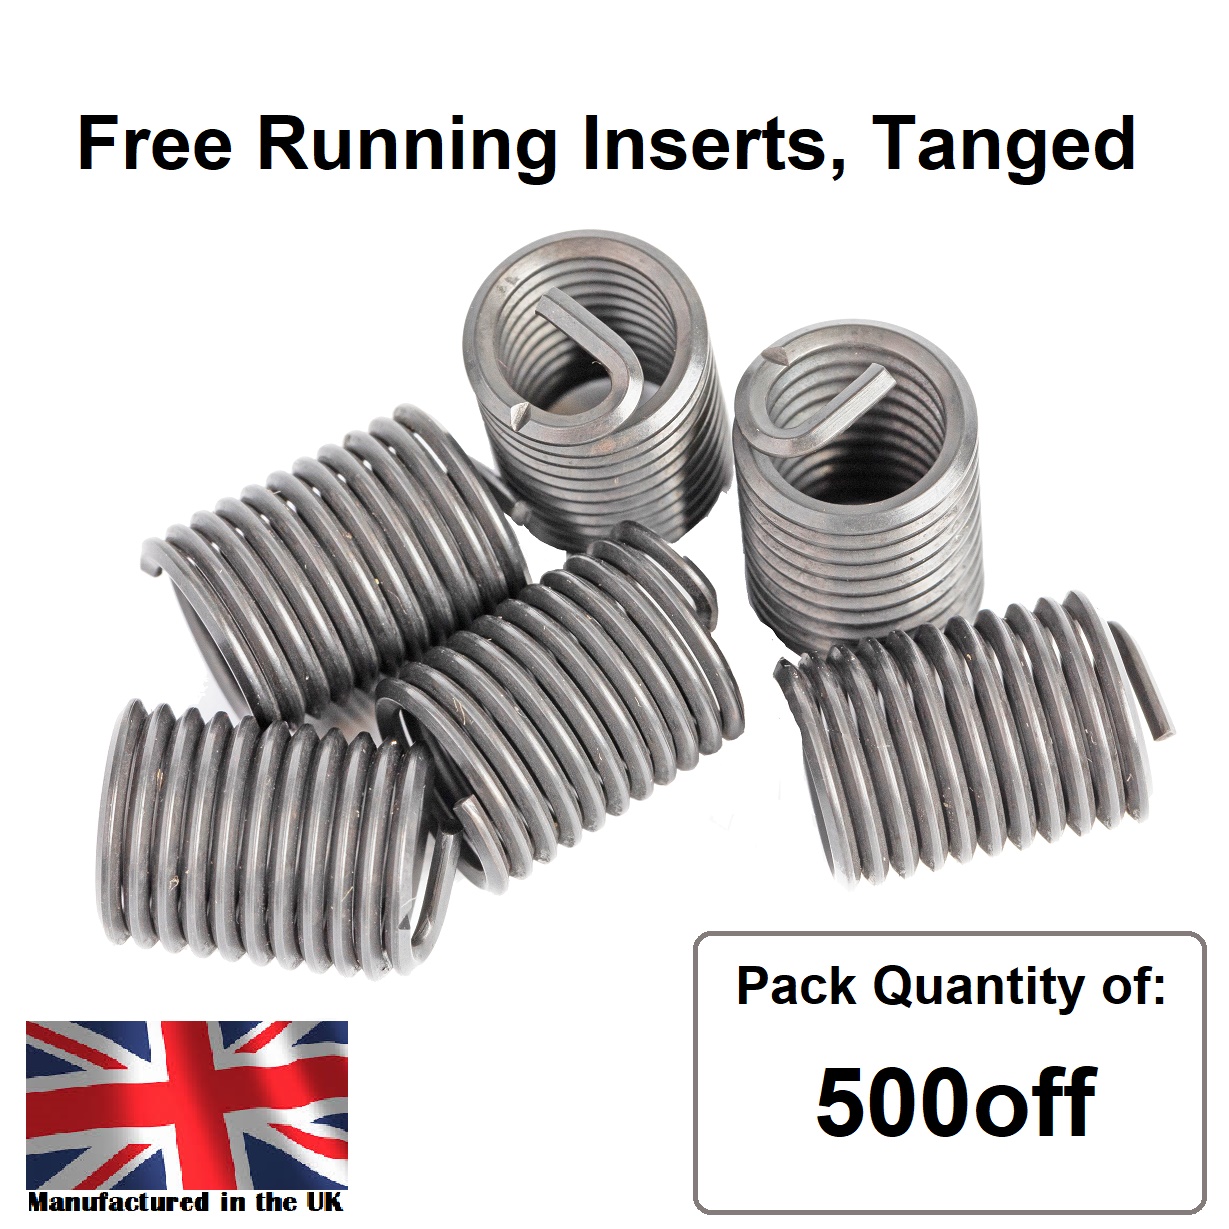 M2 x 0.4 x 1.5D Metric Coarse, Free Running, Tanged, Wire Thread Repair Insert, 304/A2 Stainless (Pack 500)